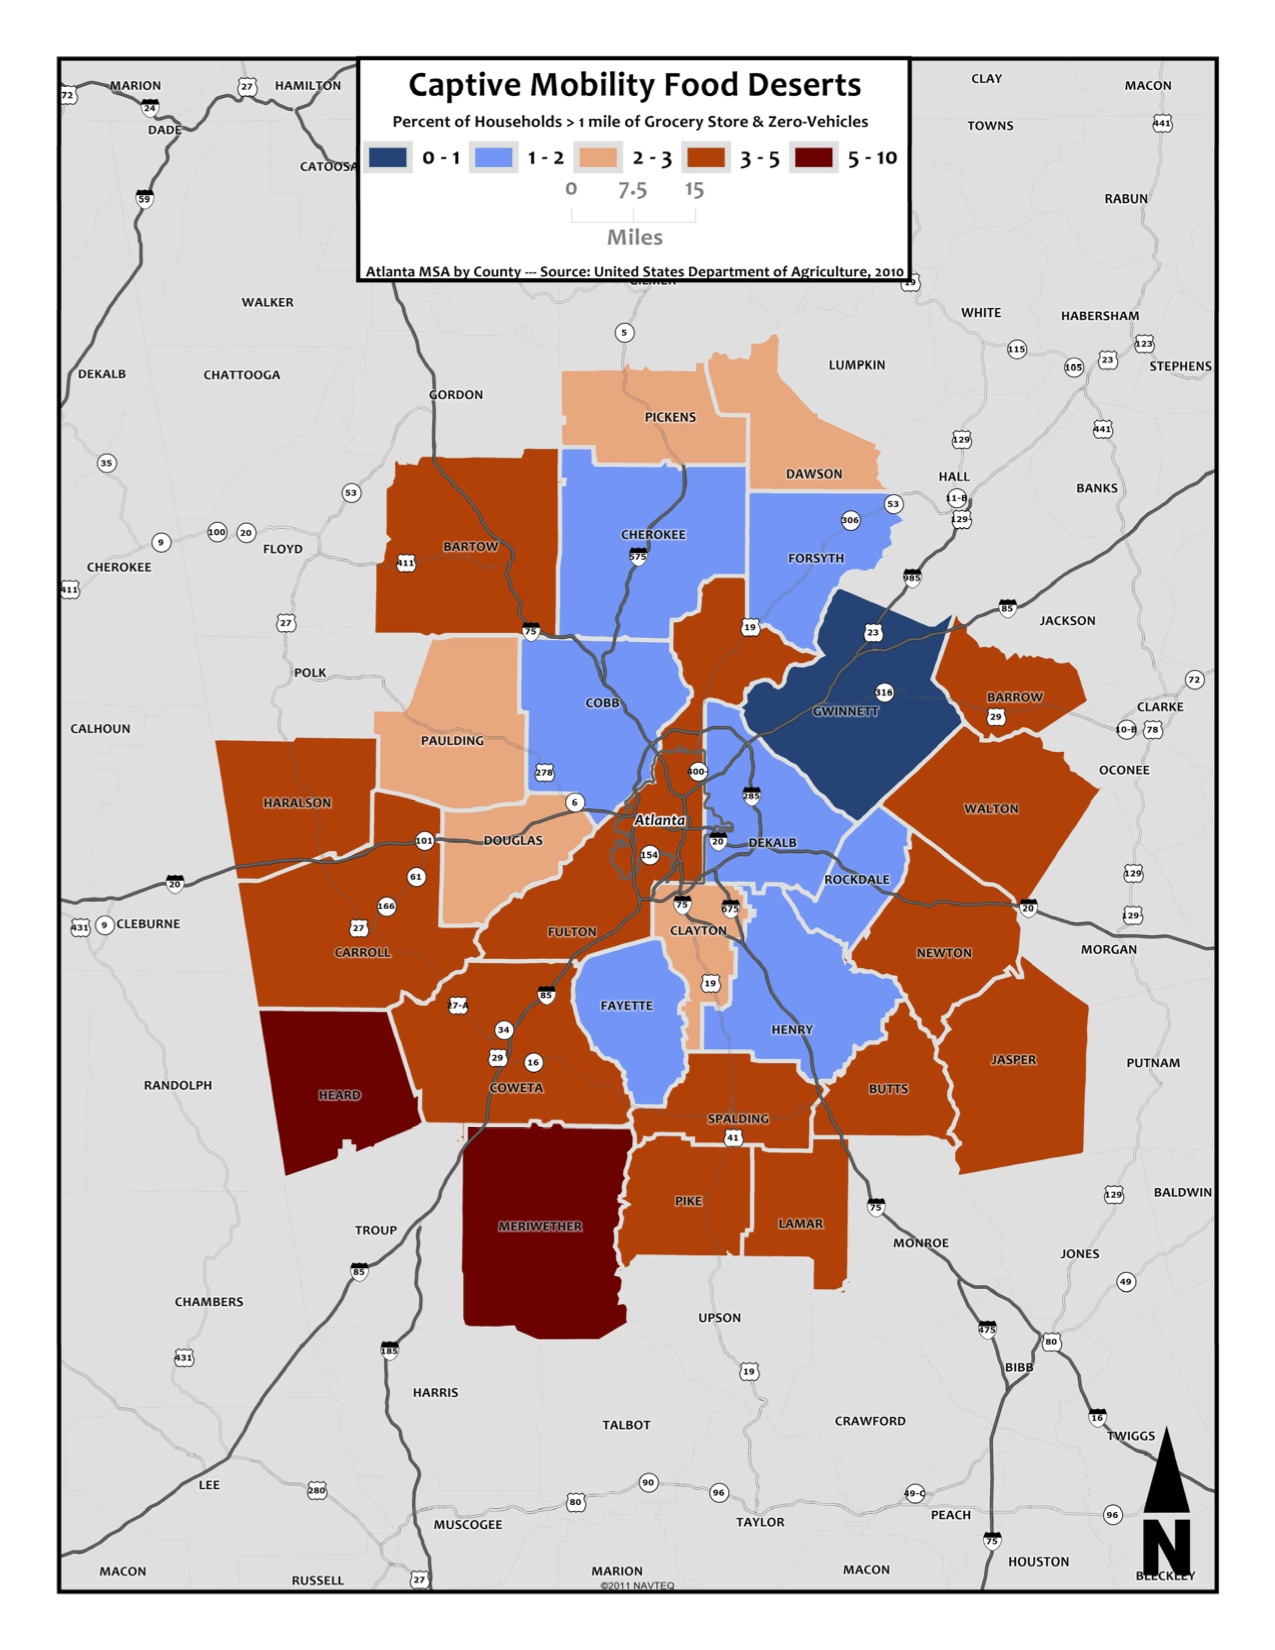 Captive Mobility Food Deserts – metro counties